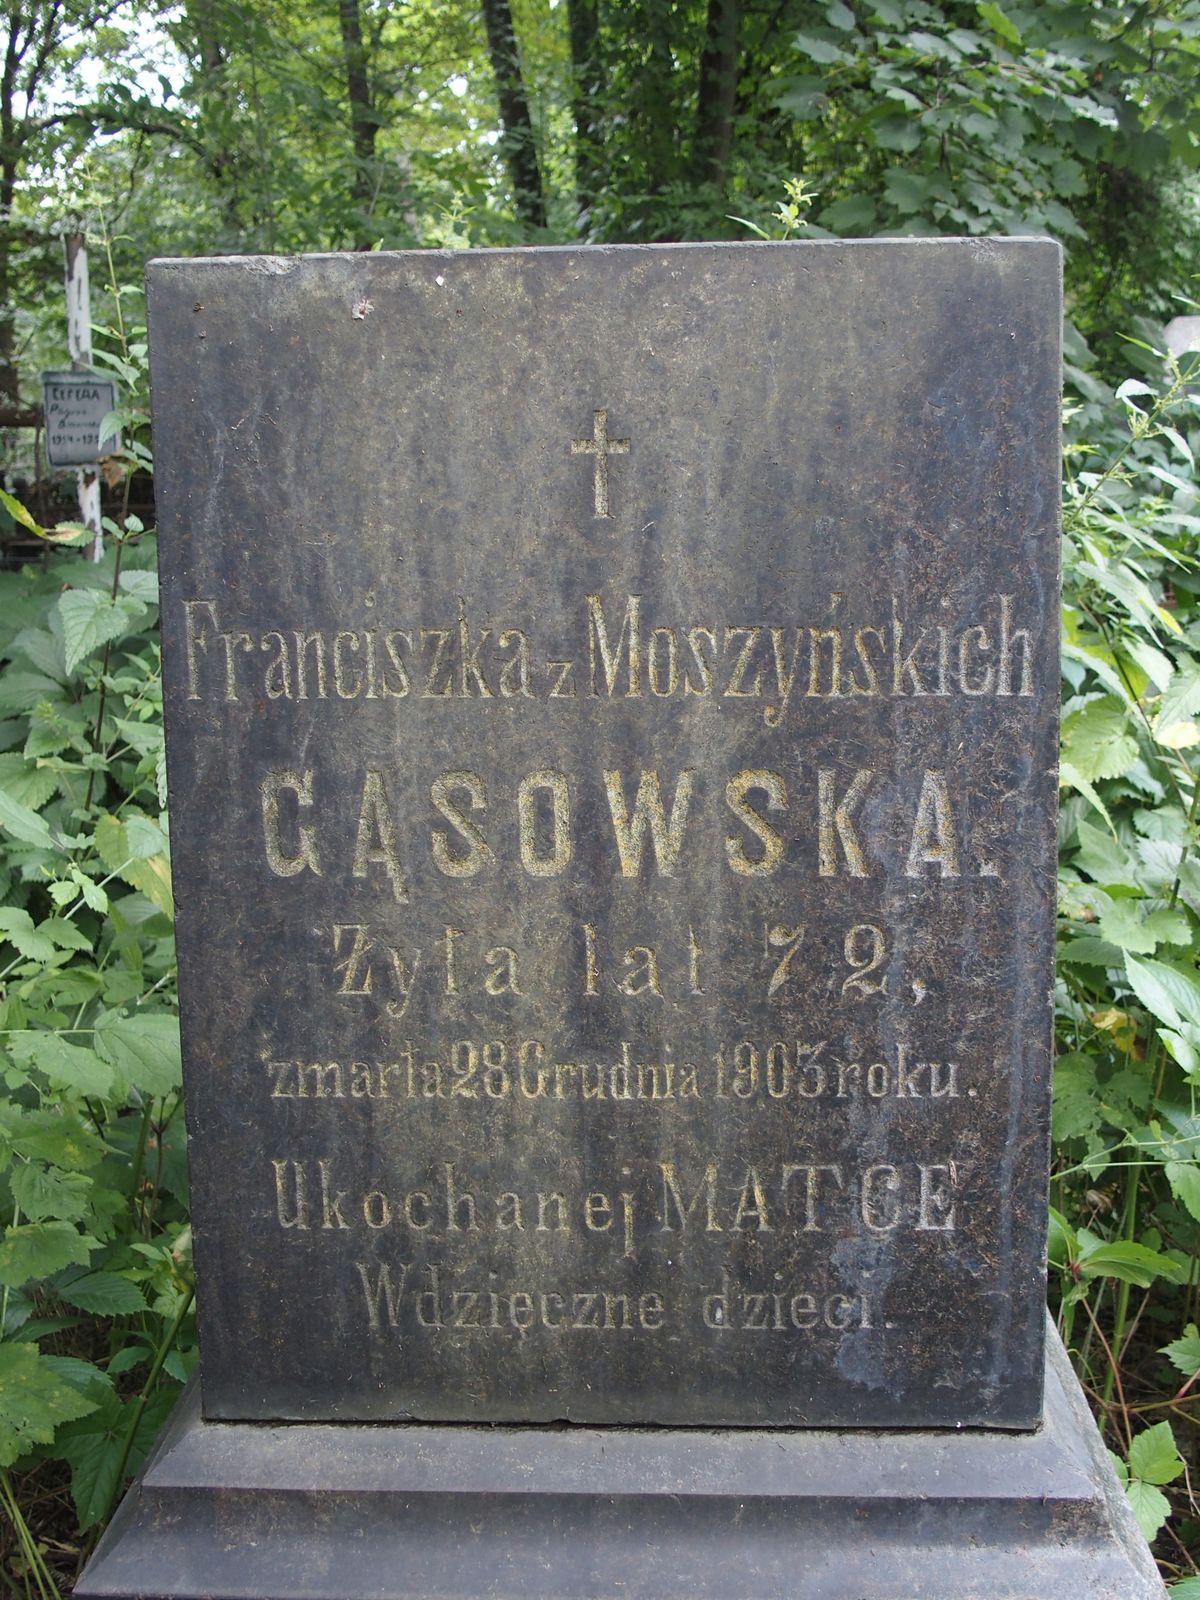 Inscription from the tombstone of Franciszka Gąsowska